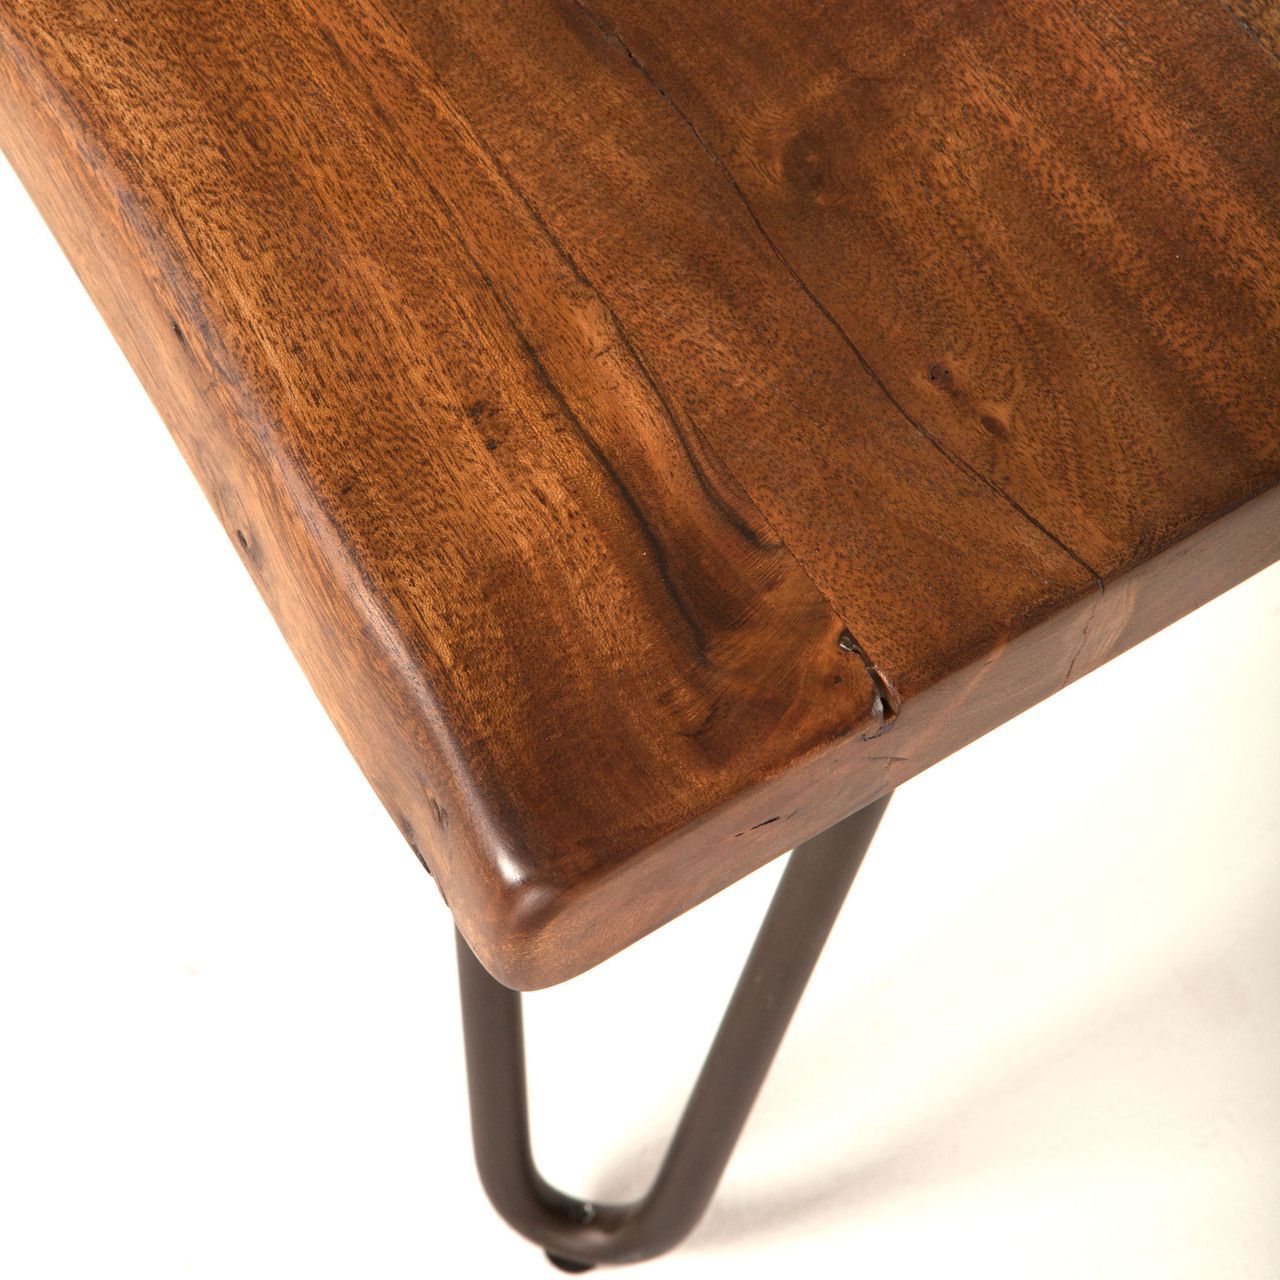 Vail Solid Wood Coffee Table In Walnut W/ Steel Legs | Solid Wood Pertaining To Coffee Tables With Solid Legs (Gallery 11 of 20)